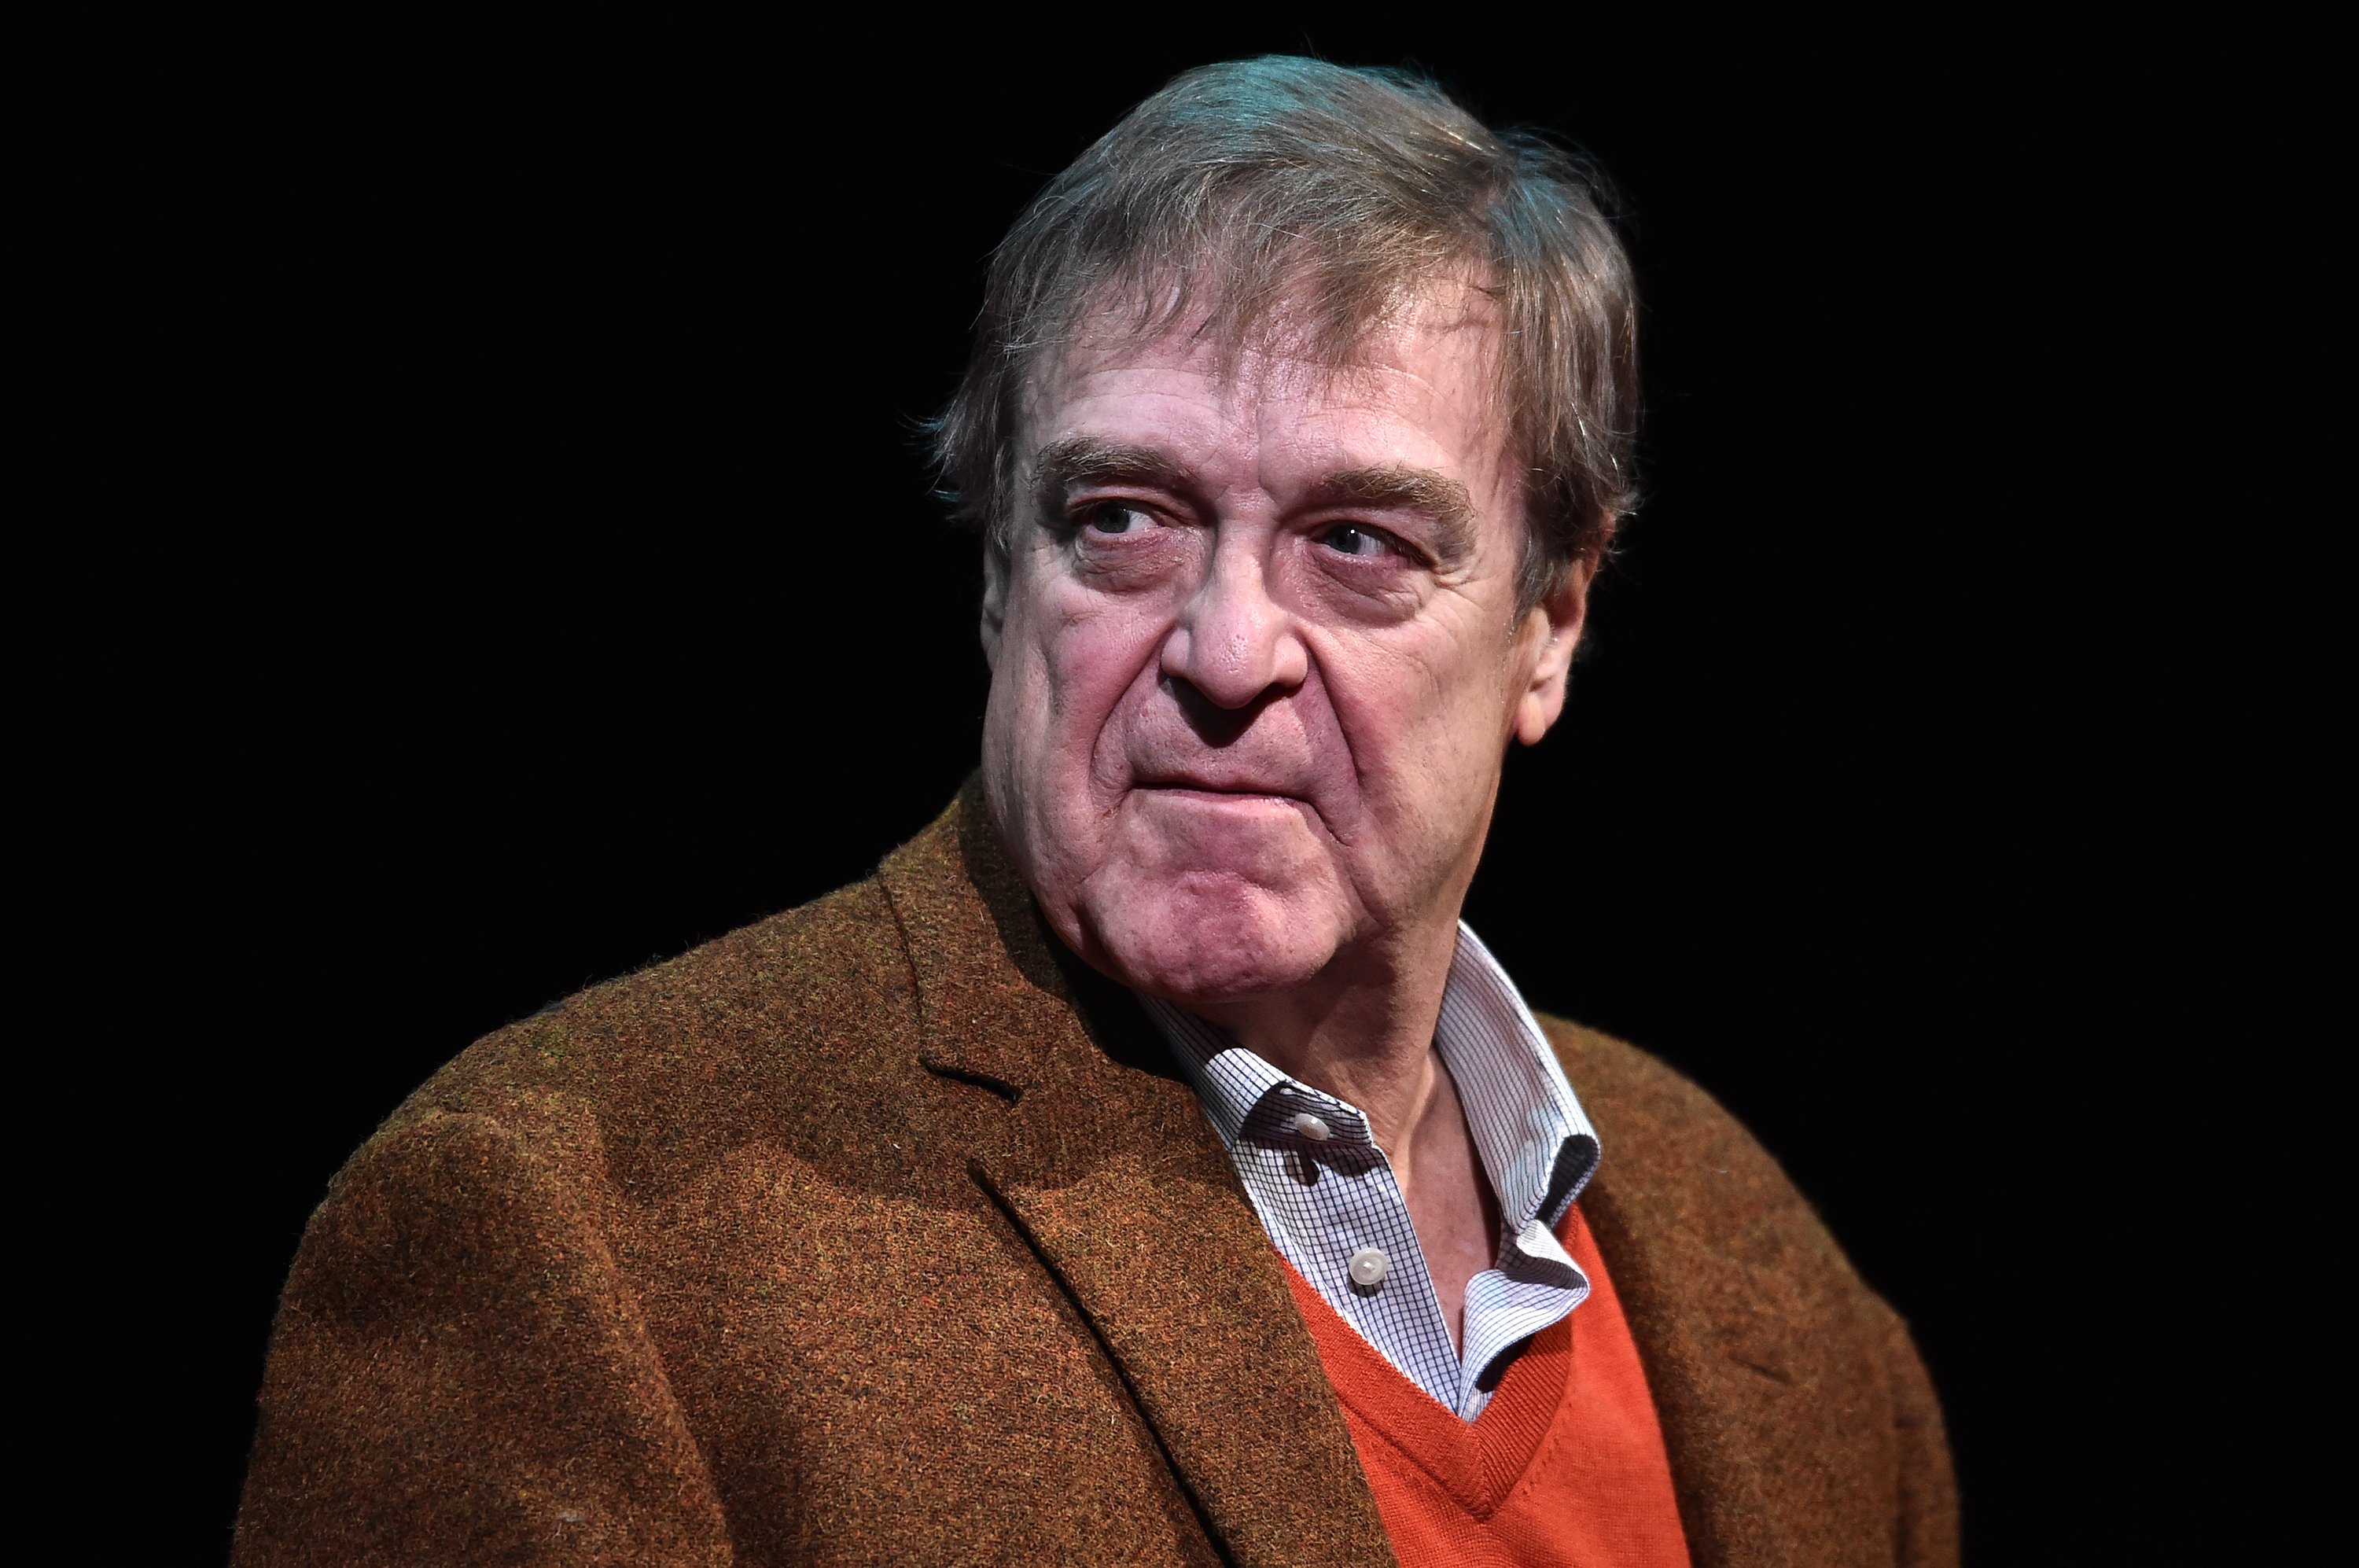  John Goodman attends SAG-AFTRA Foundation Conversations: "Black Earth Rising" at The Robin Williams Center on January 22, 2019 | Photo: Getty Images